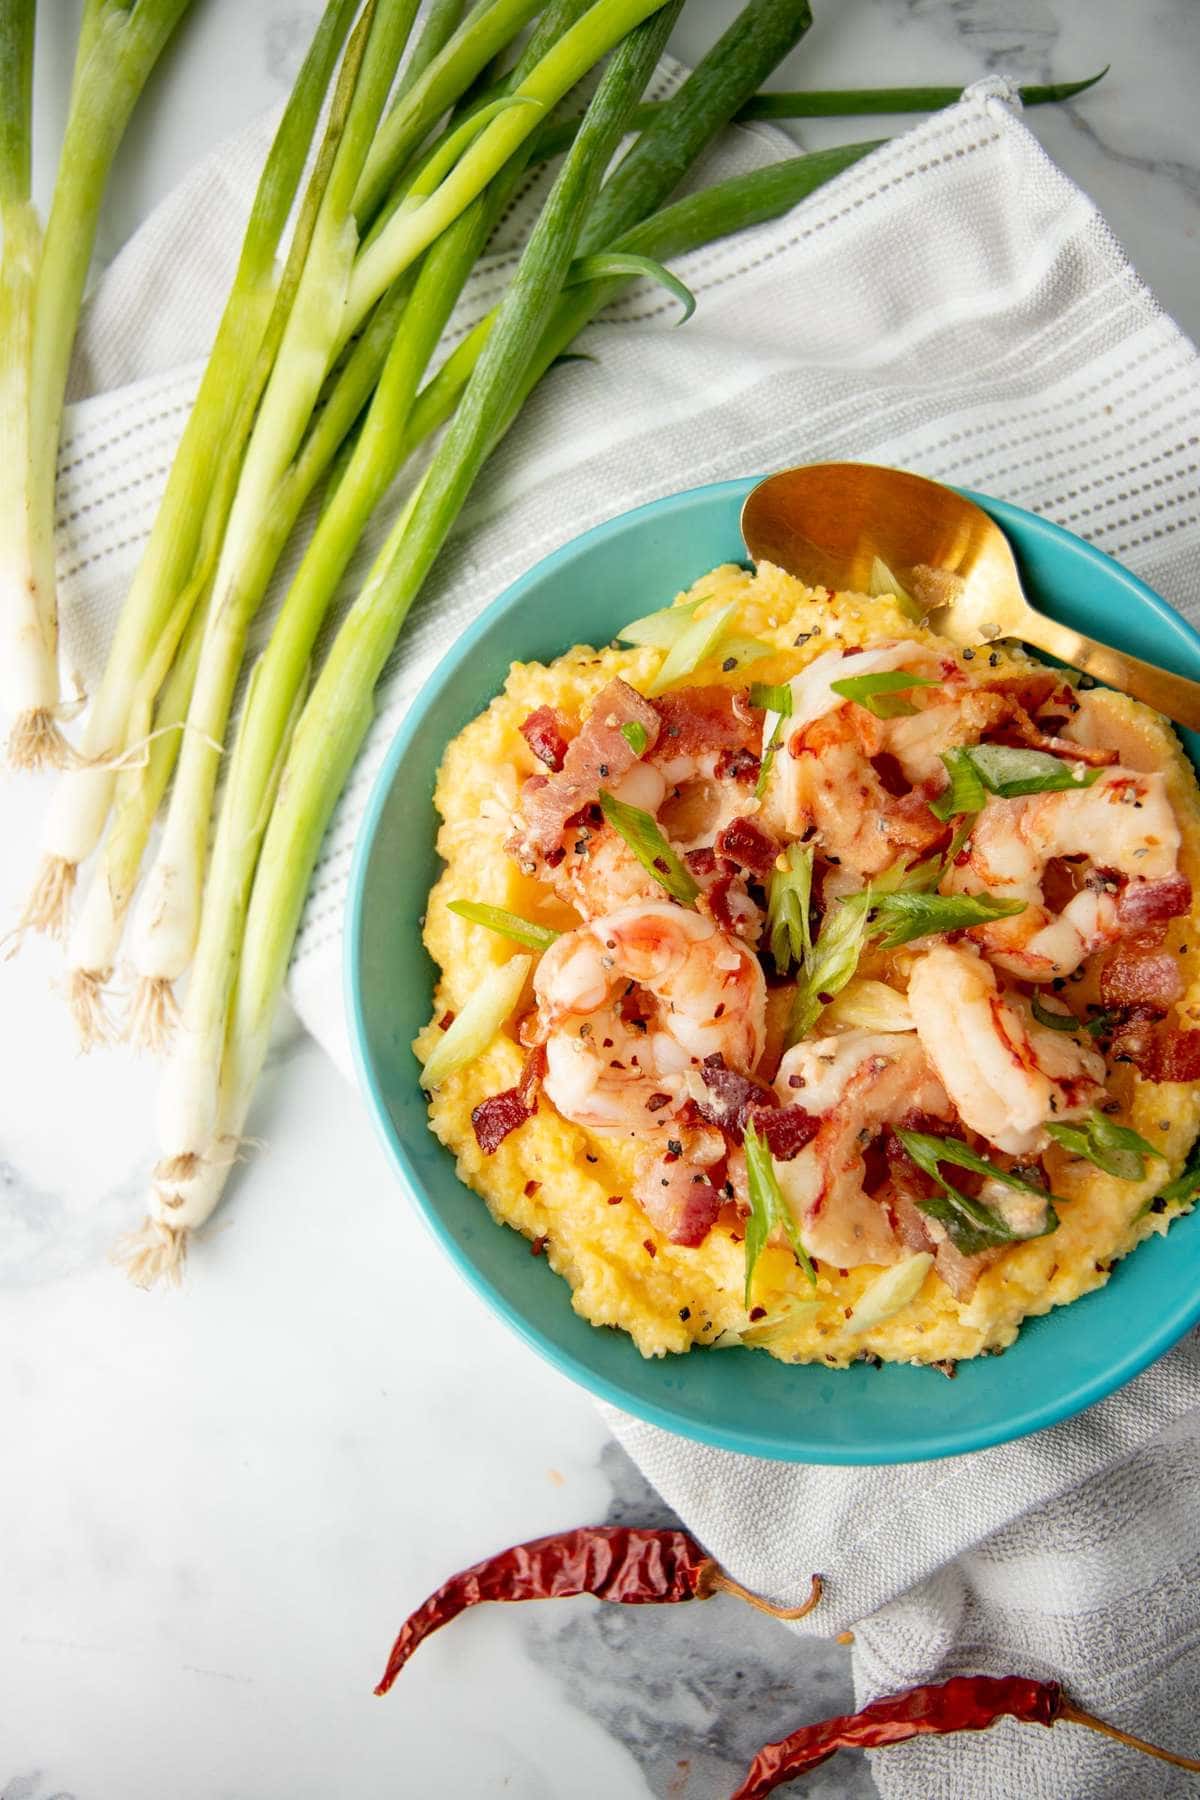 Overhead of a bowl of shrimp and grits on a kitchen towel with whole green onions and dried red peppers nearby.